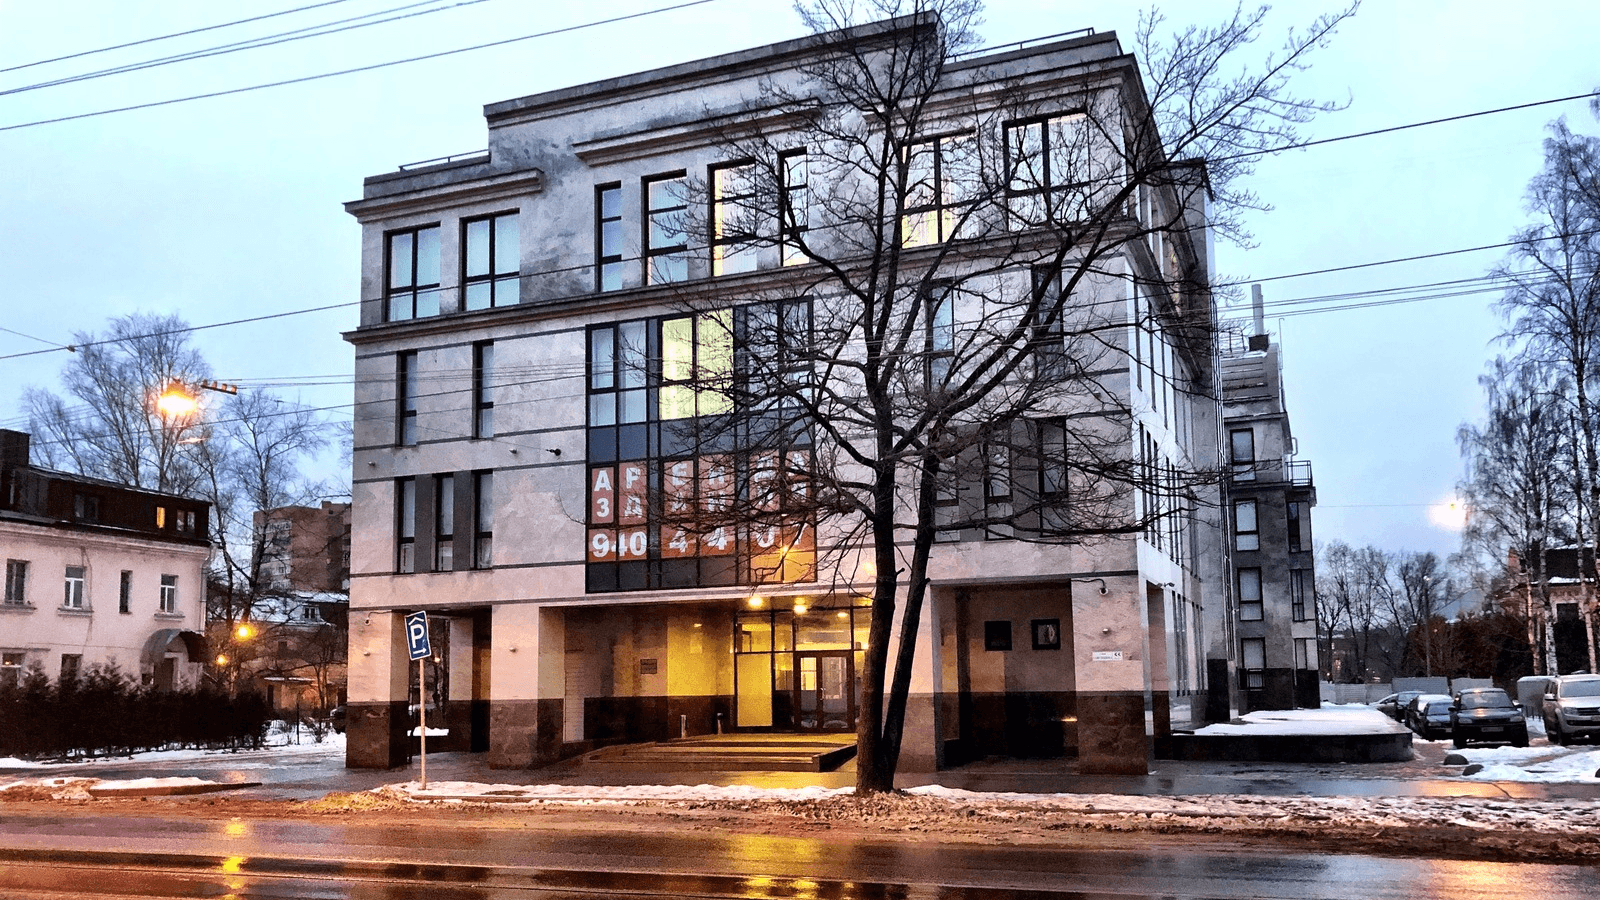 The Internet Research Agency, or IRA, in St. Petersburg, Russia. 